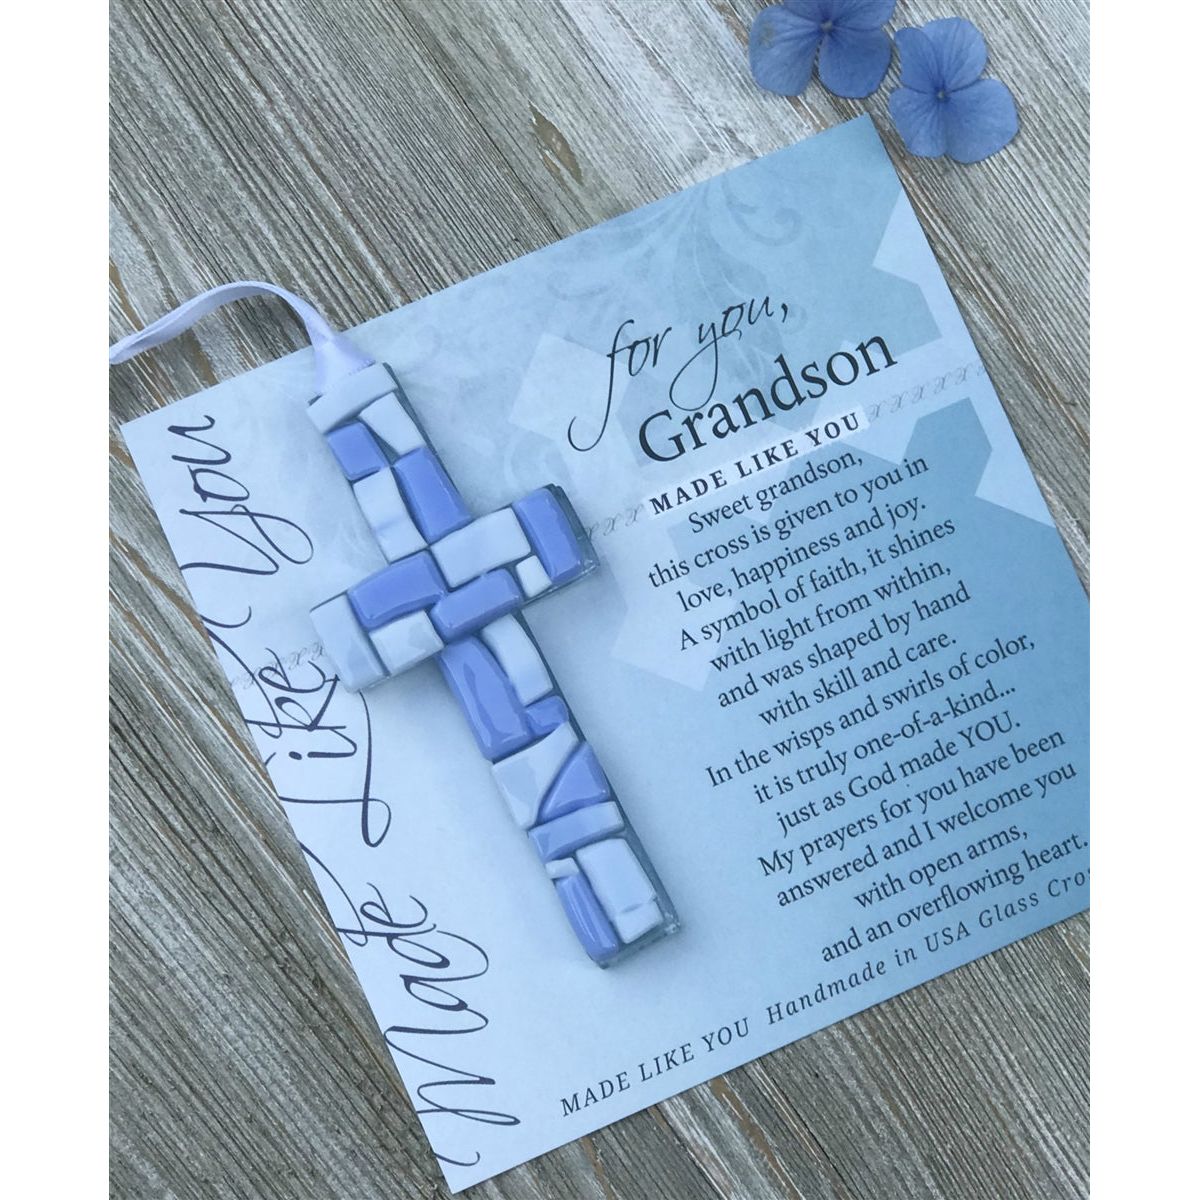 Blue Mosaic cross with shades of blue and white glass lying on the For You, Grandson sentiment artwork.